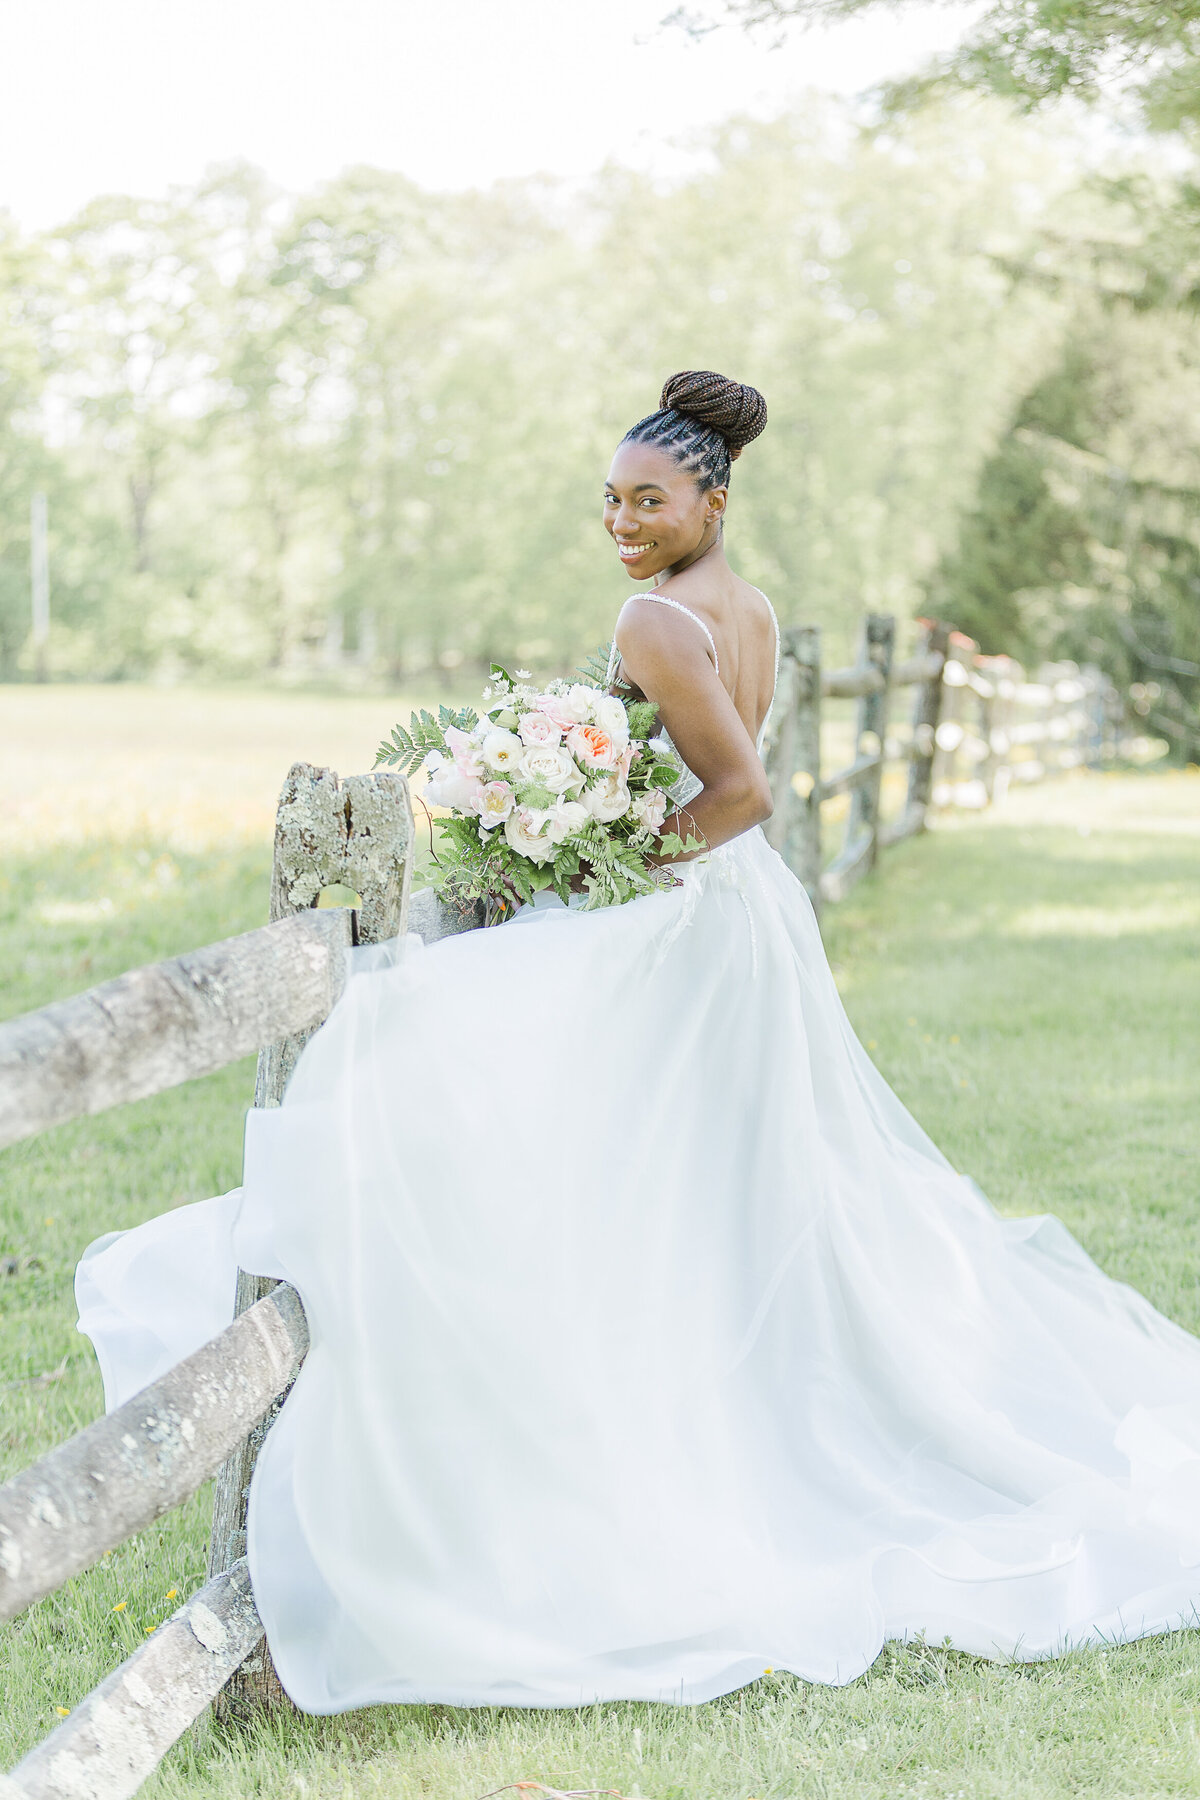 Bride poses alongside a wooden fence Her back is to the camera and she is looking over her shoulder and smiling. Captured by RI Wedding Photographer Lia Rose Weddings